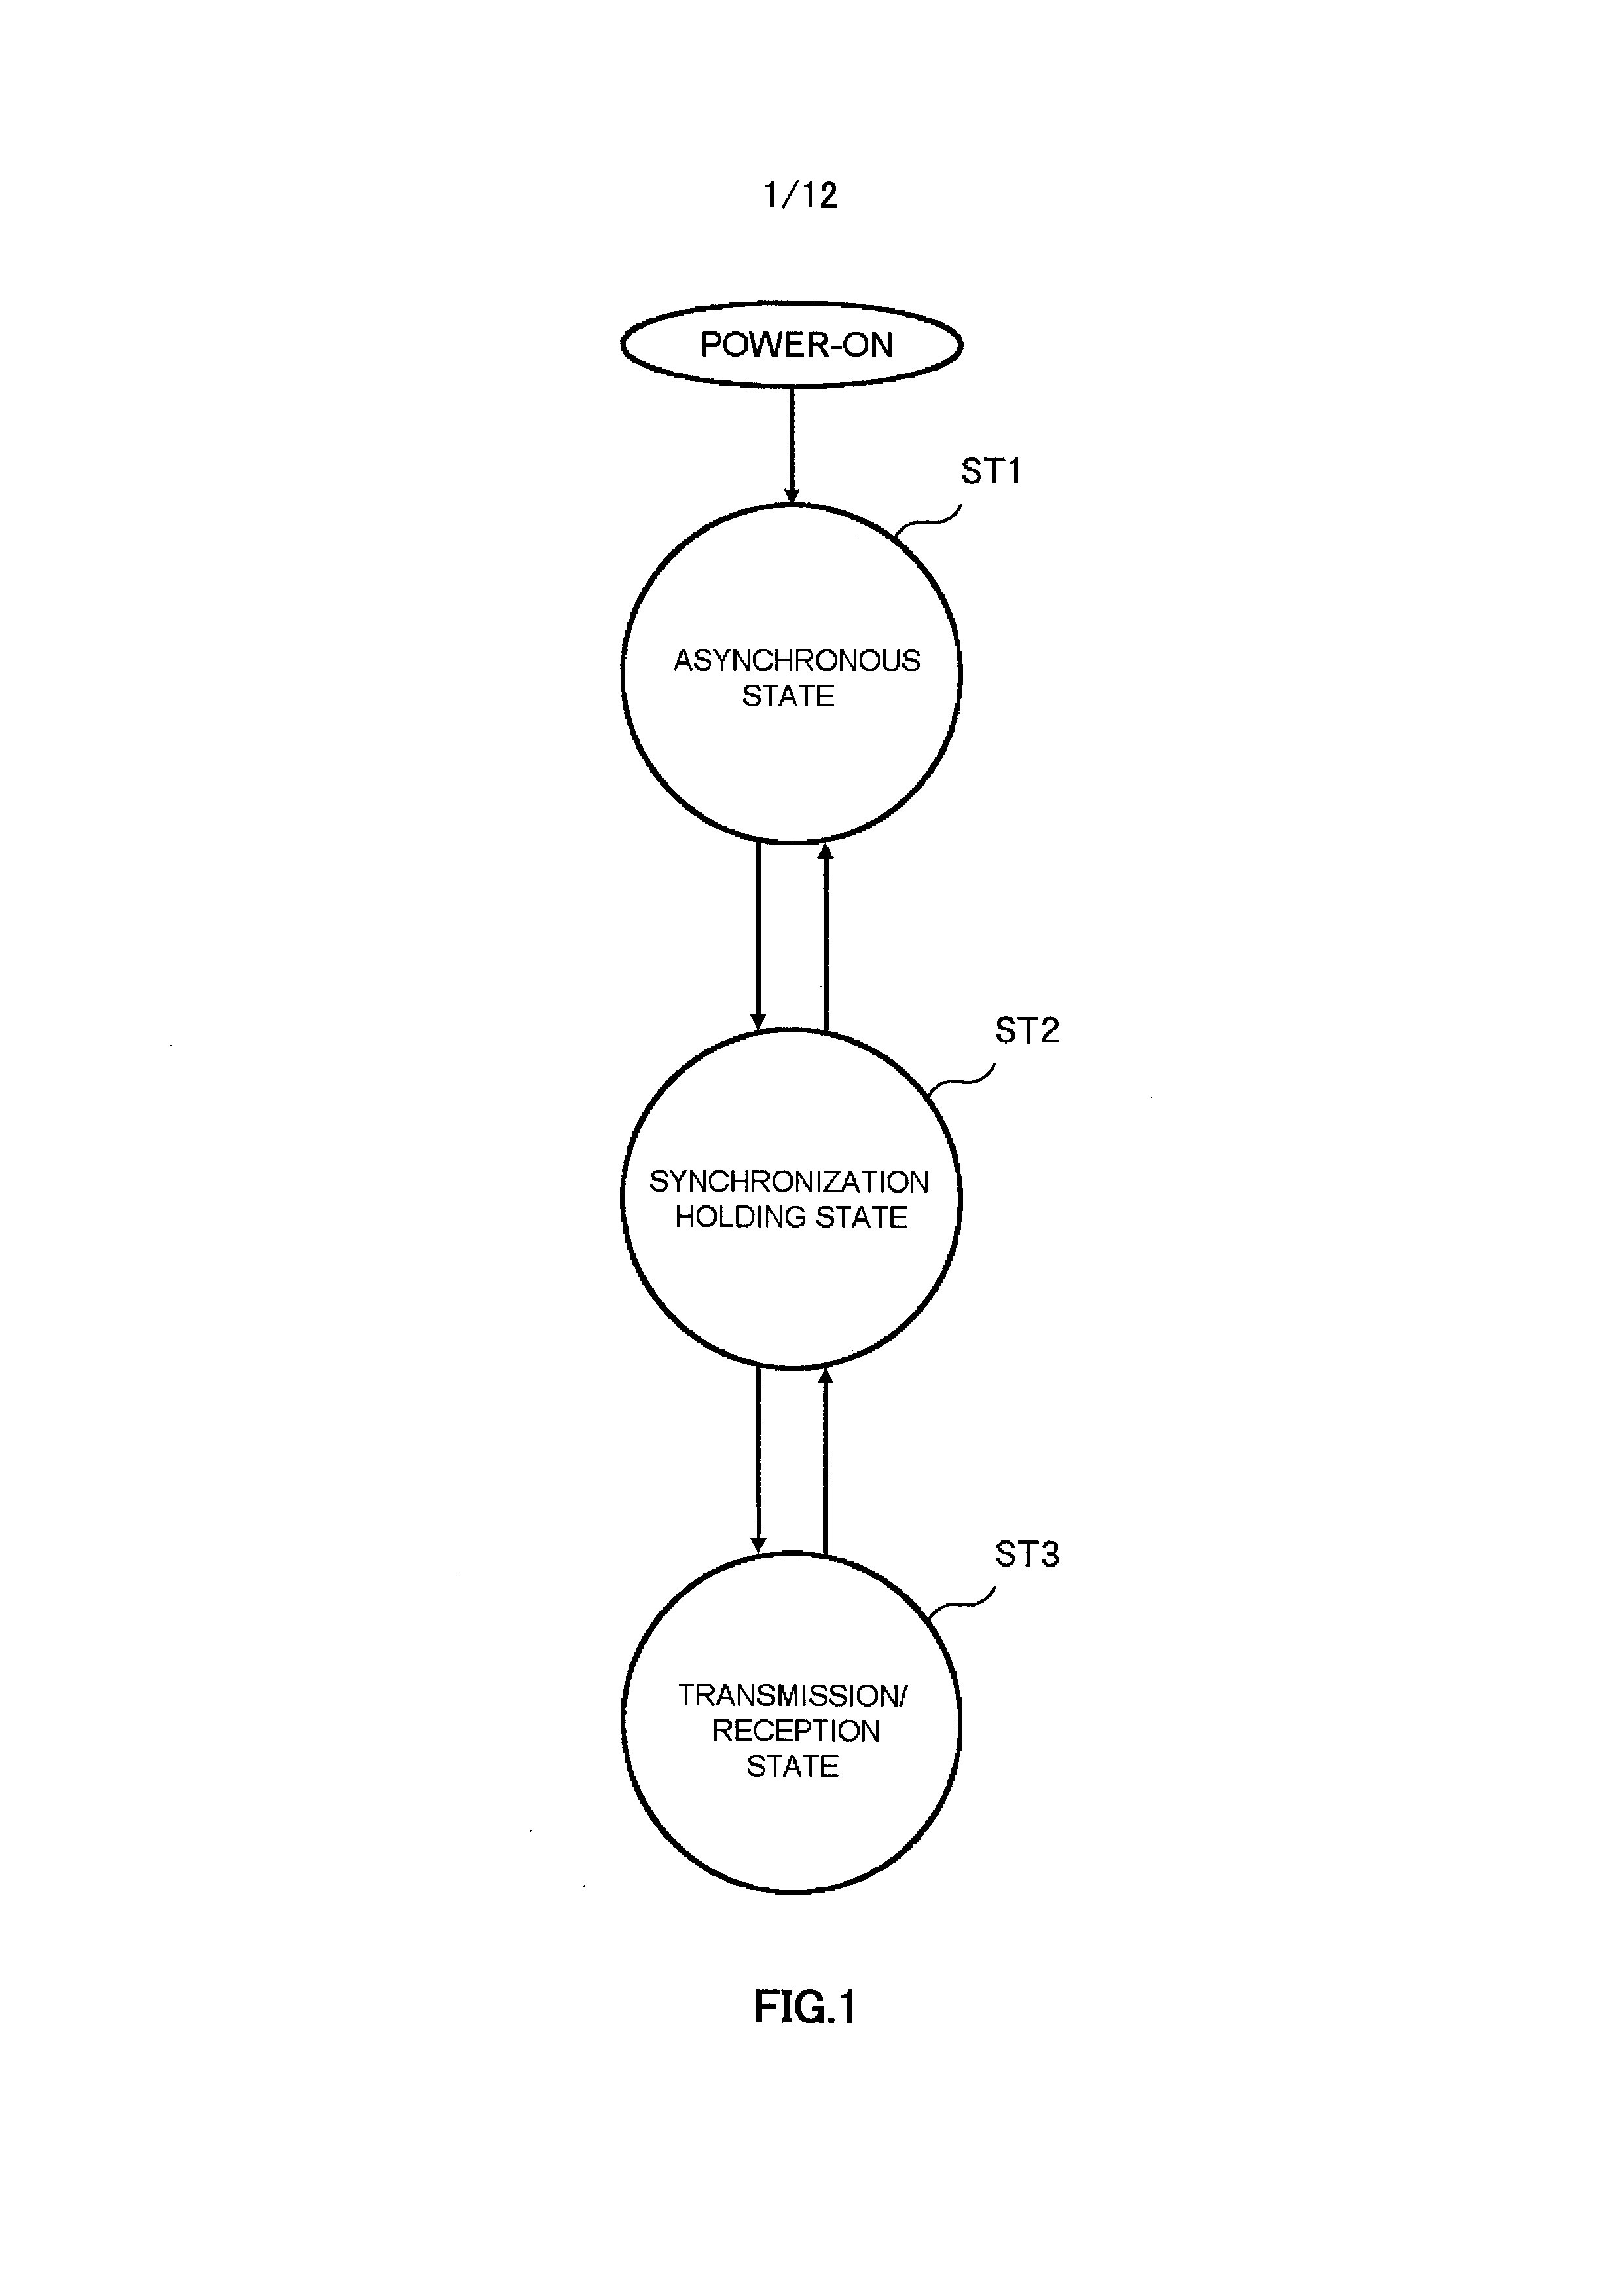 Spread spectrum communication method adn system using very weak power, and high frequency radio apparatus